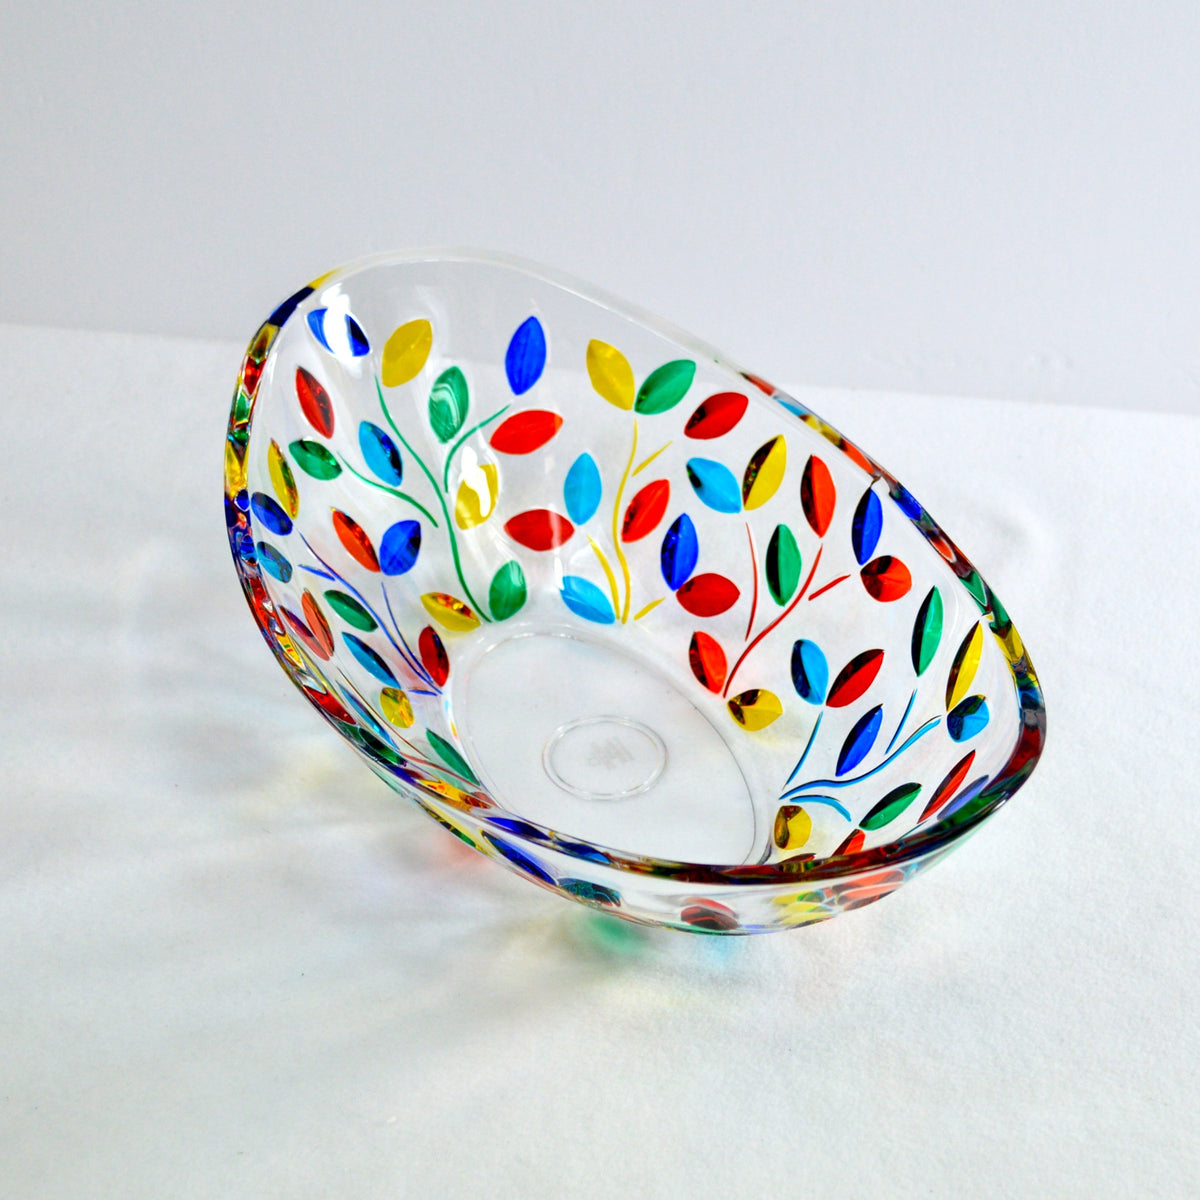 Flowervine Oval Glass Bowl, Handmade and Painted in Italy - My Italian Decor